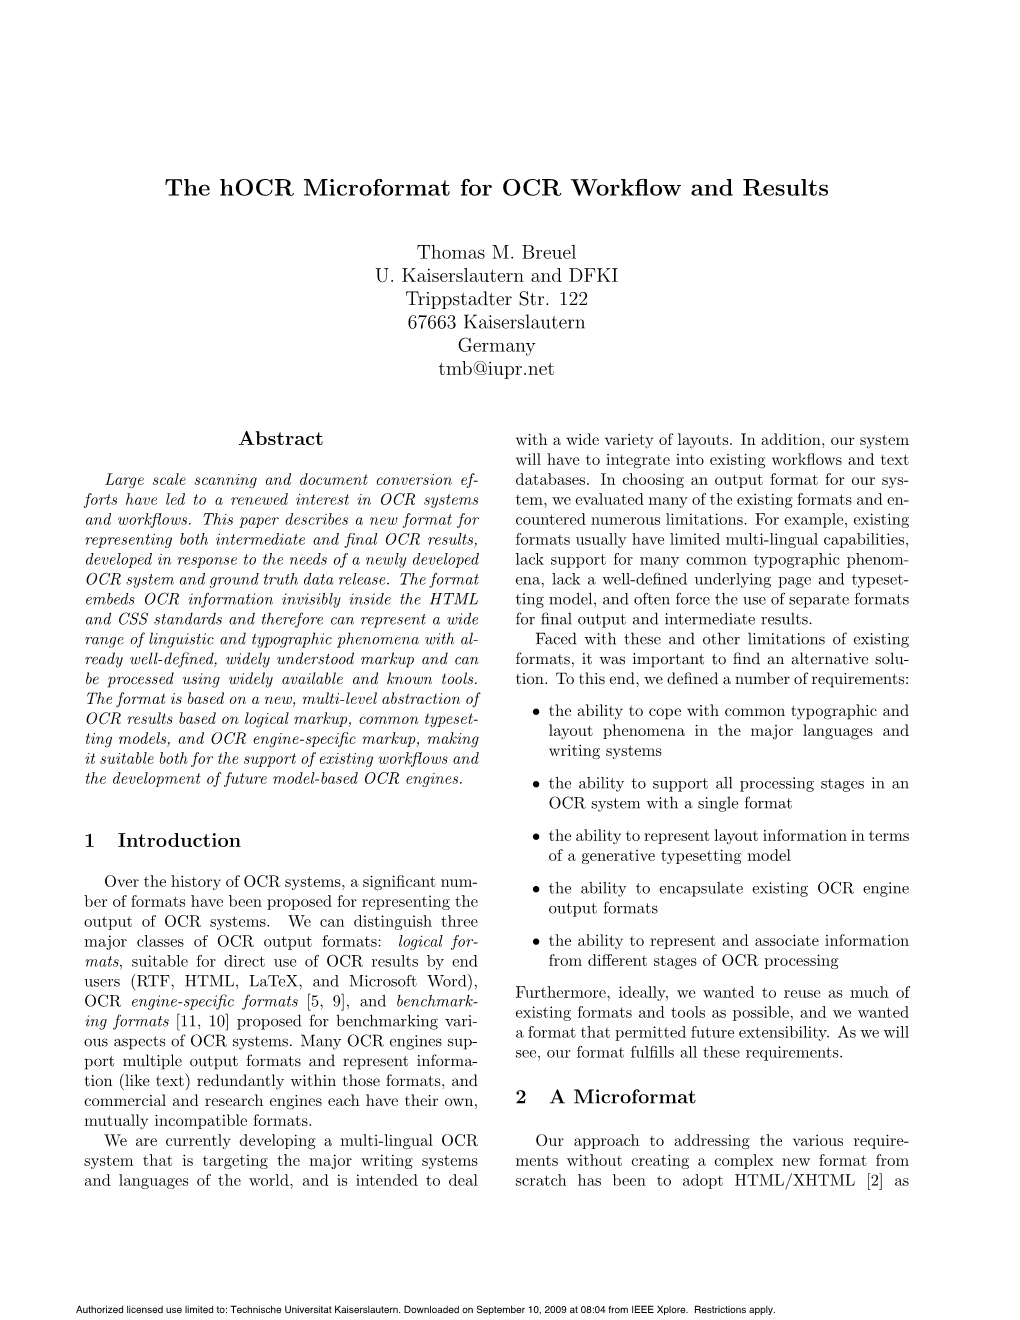 The Hocr Microformat for OCR Workflow and Results DocsLib